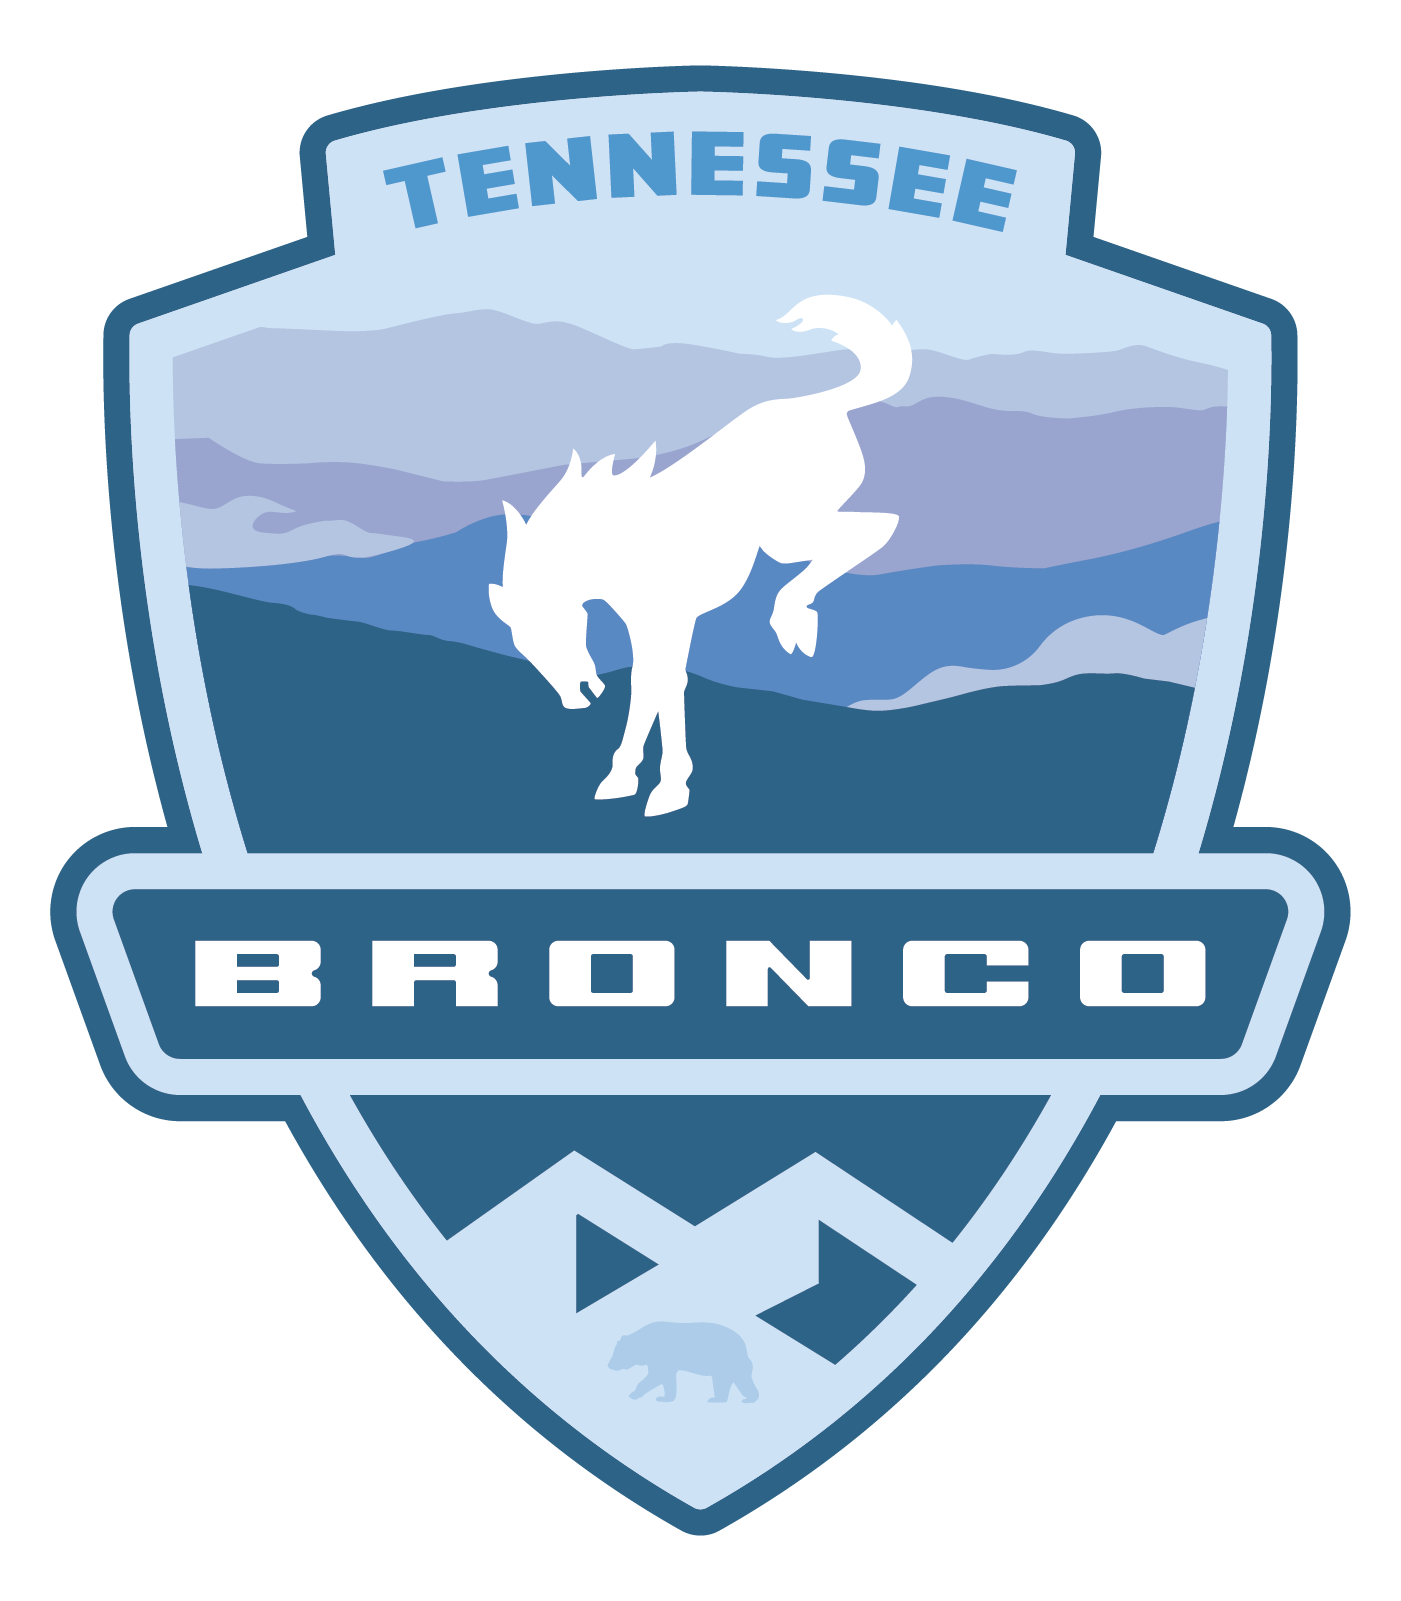 Bronco Tennessee